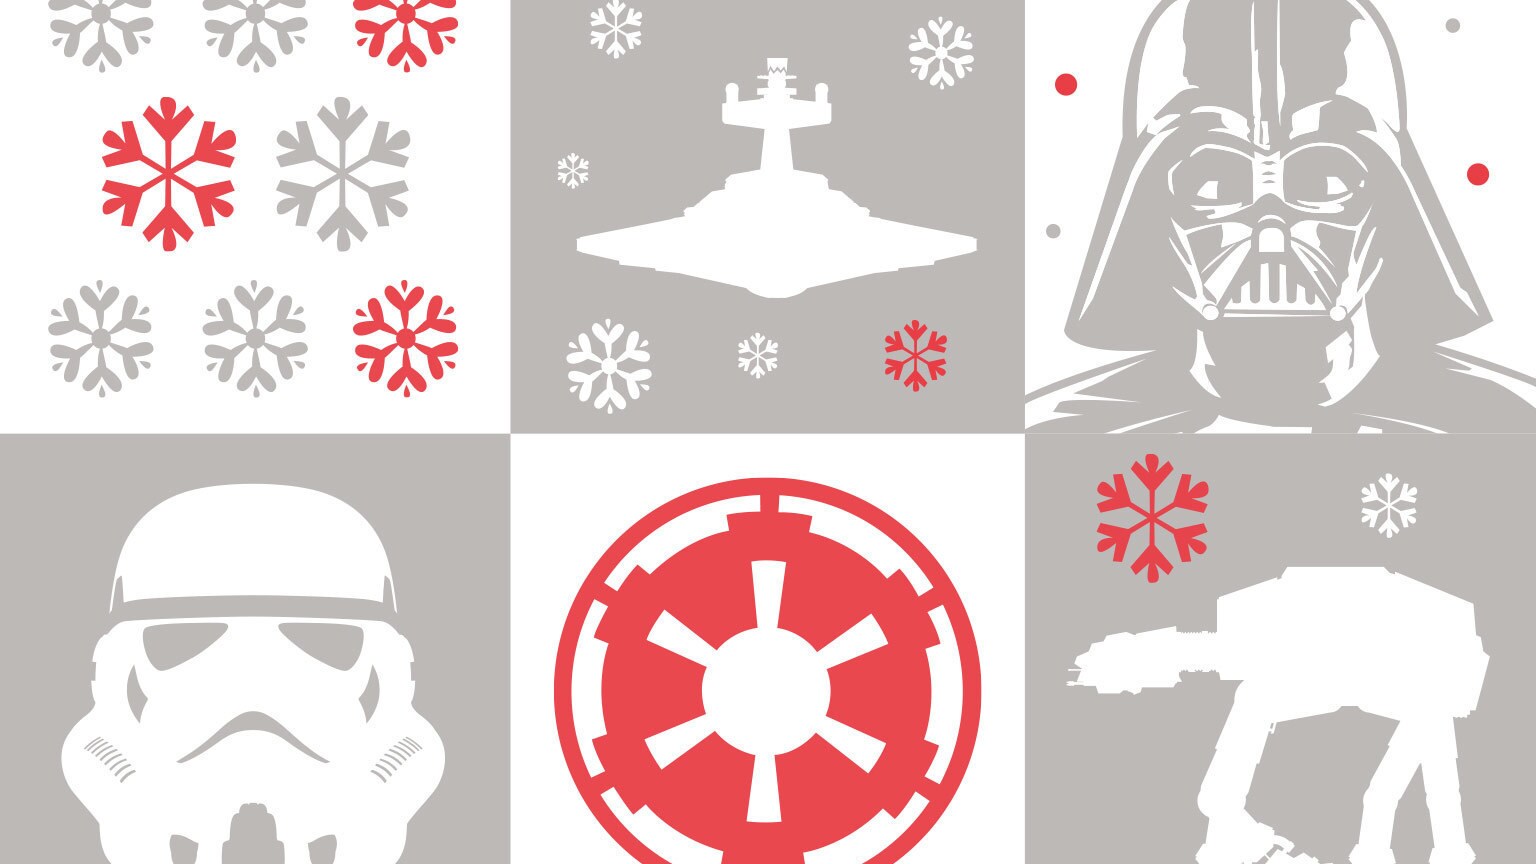 This is How SportsNation Does a Star Wars Christmas